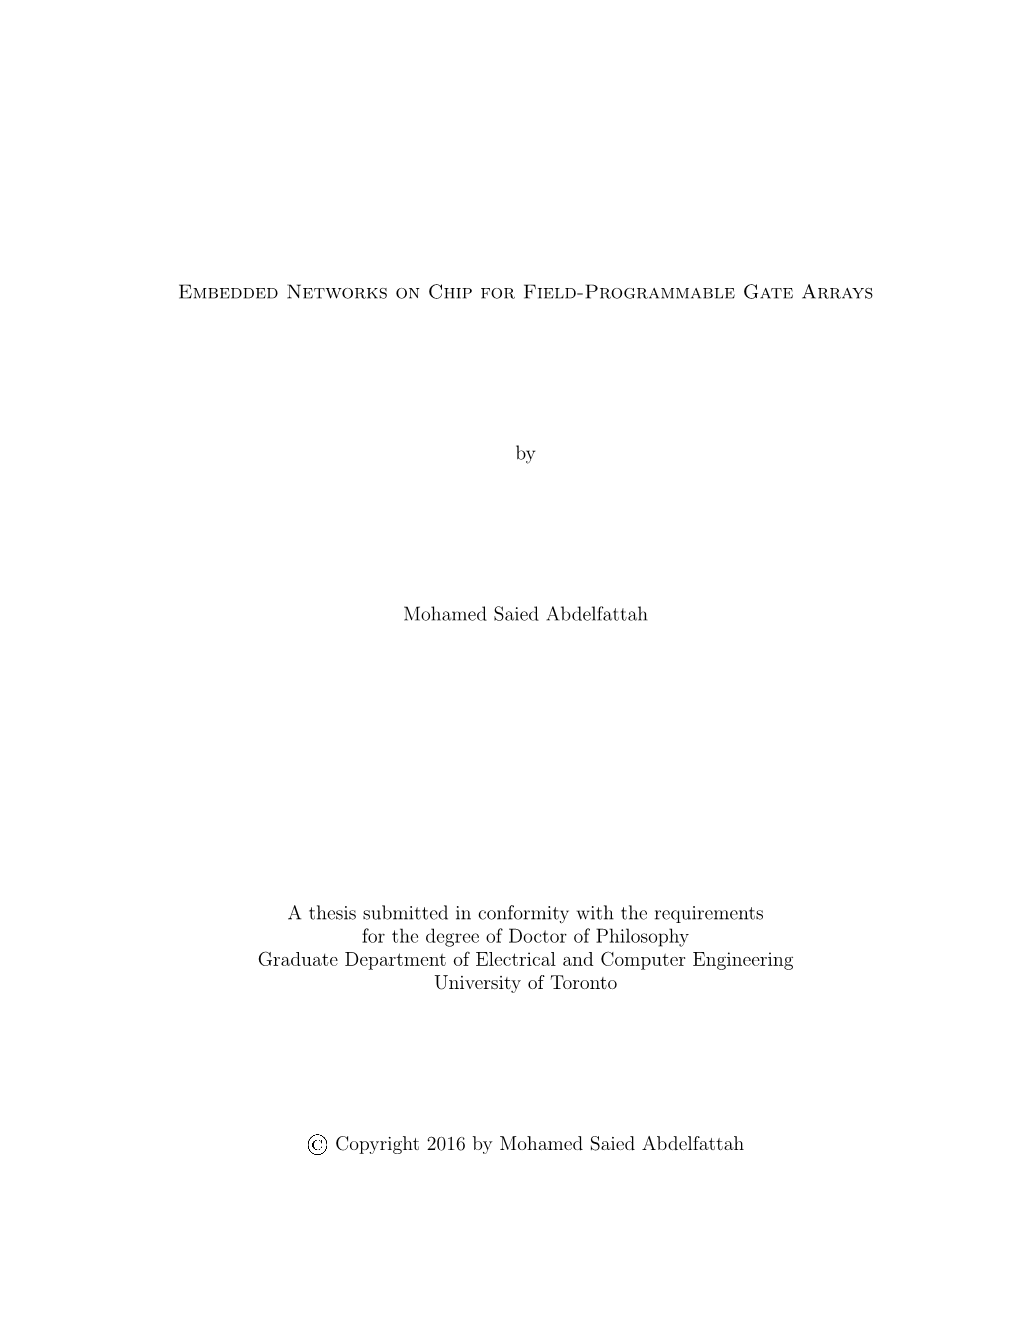 Embedded Networks on Chip for Field-Programmable Gate Arrays by Mohamed Saied Abdelfattah a Thesis Submitted in Conformity With